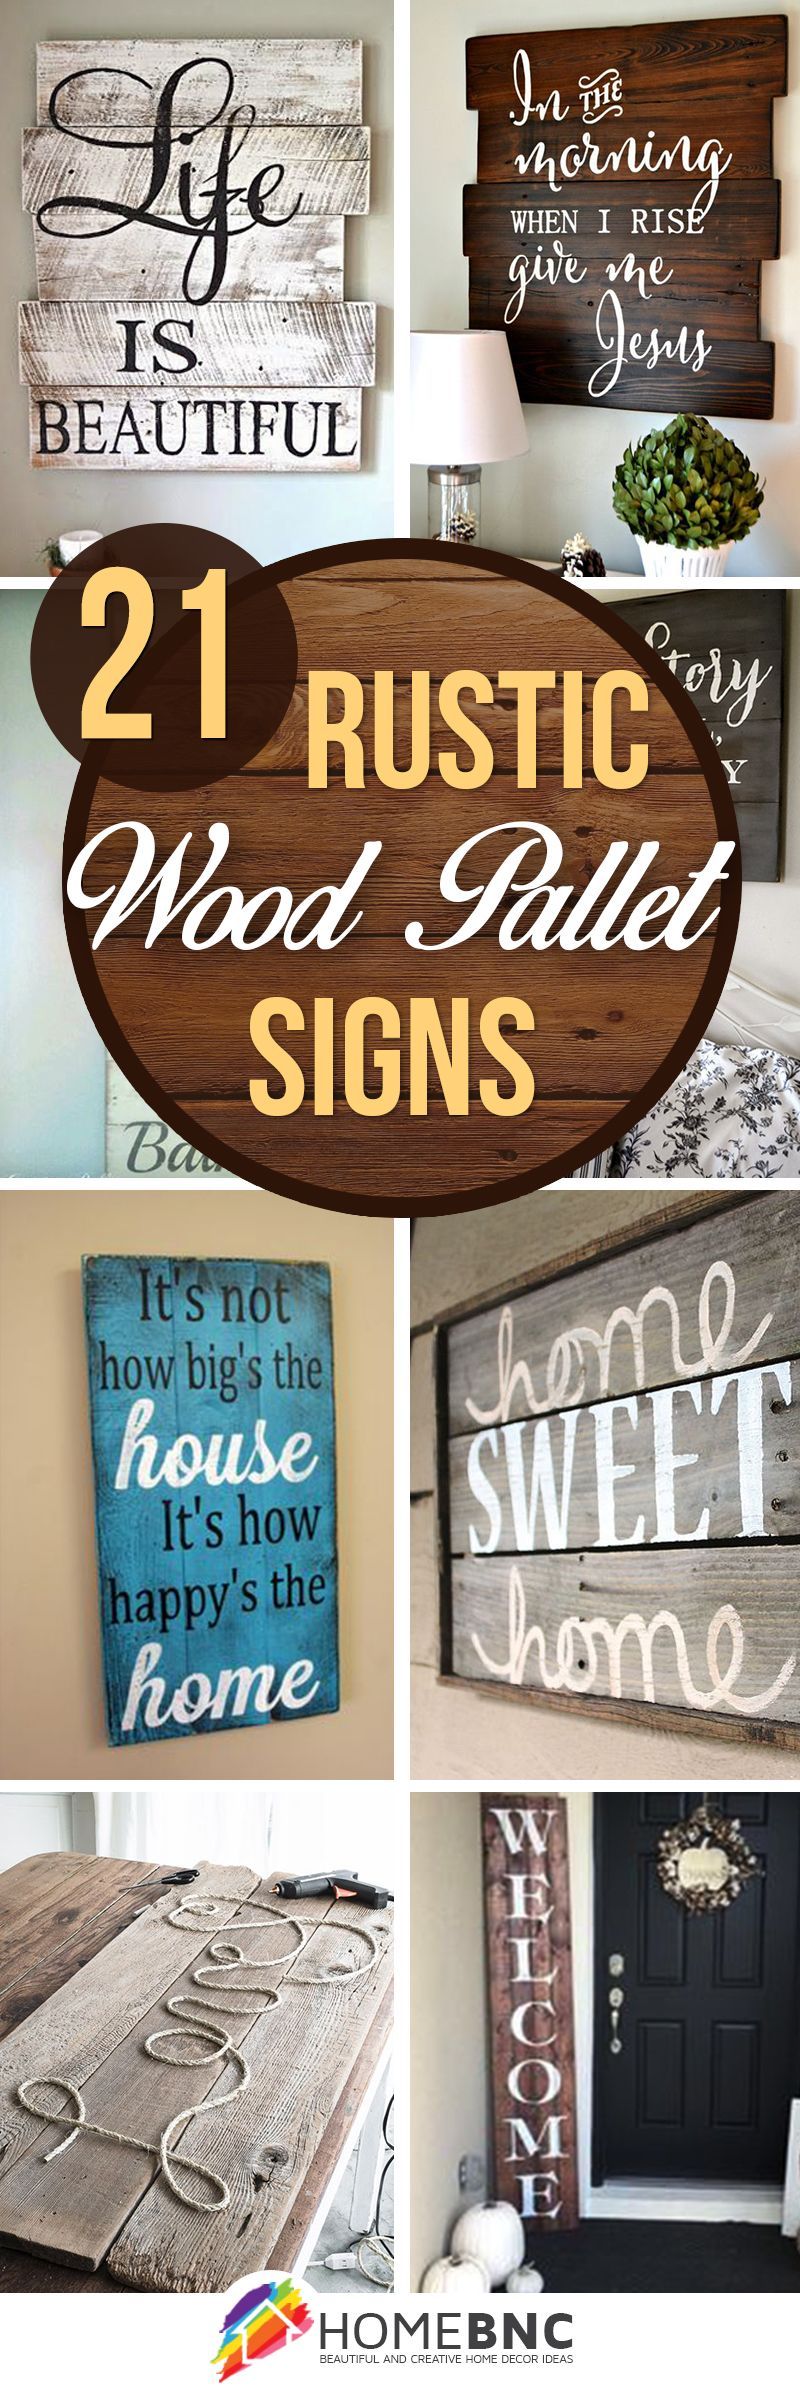 Wood Sign Ideas More